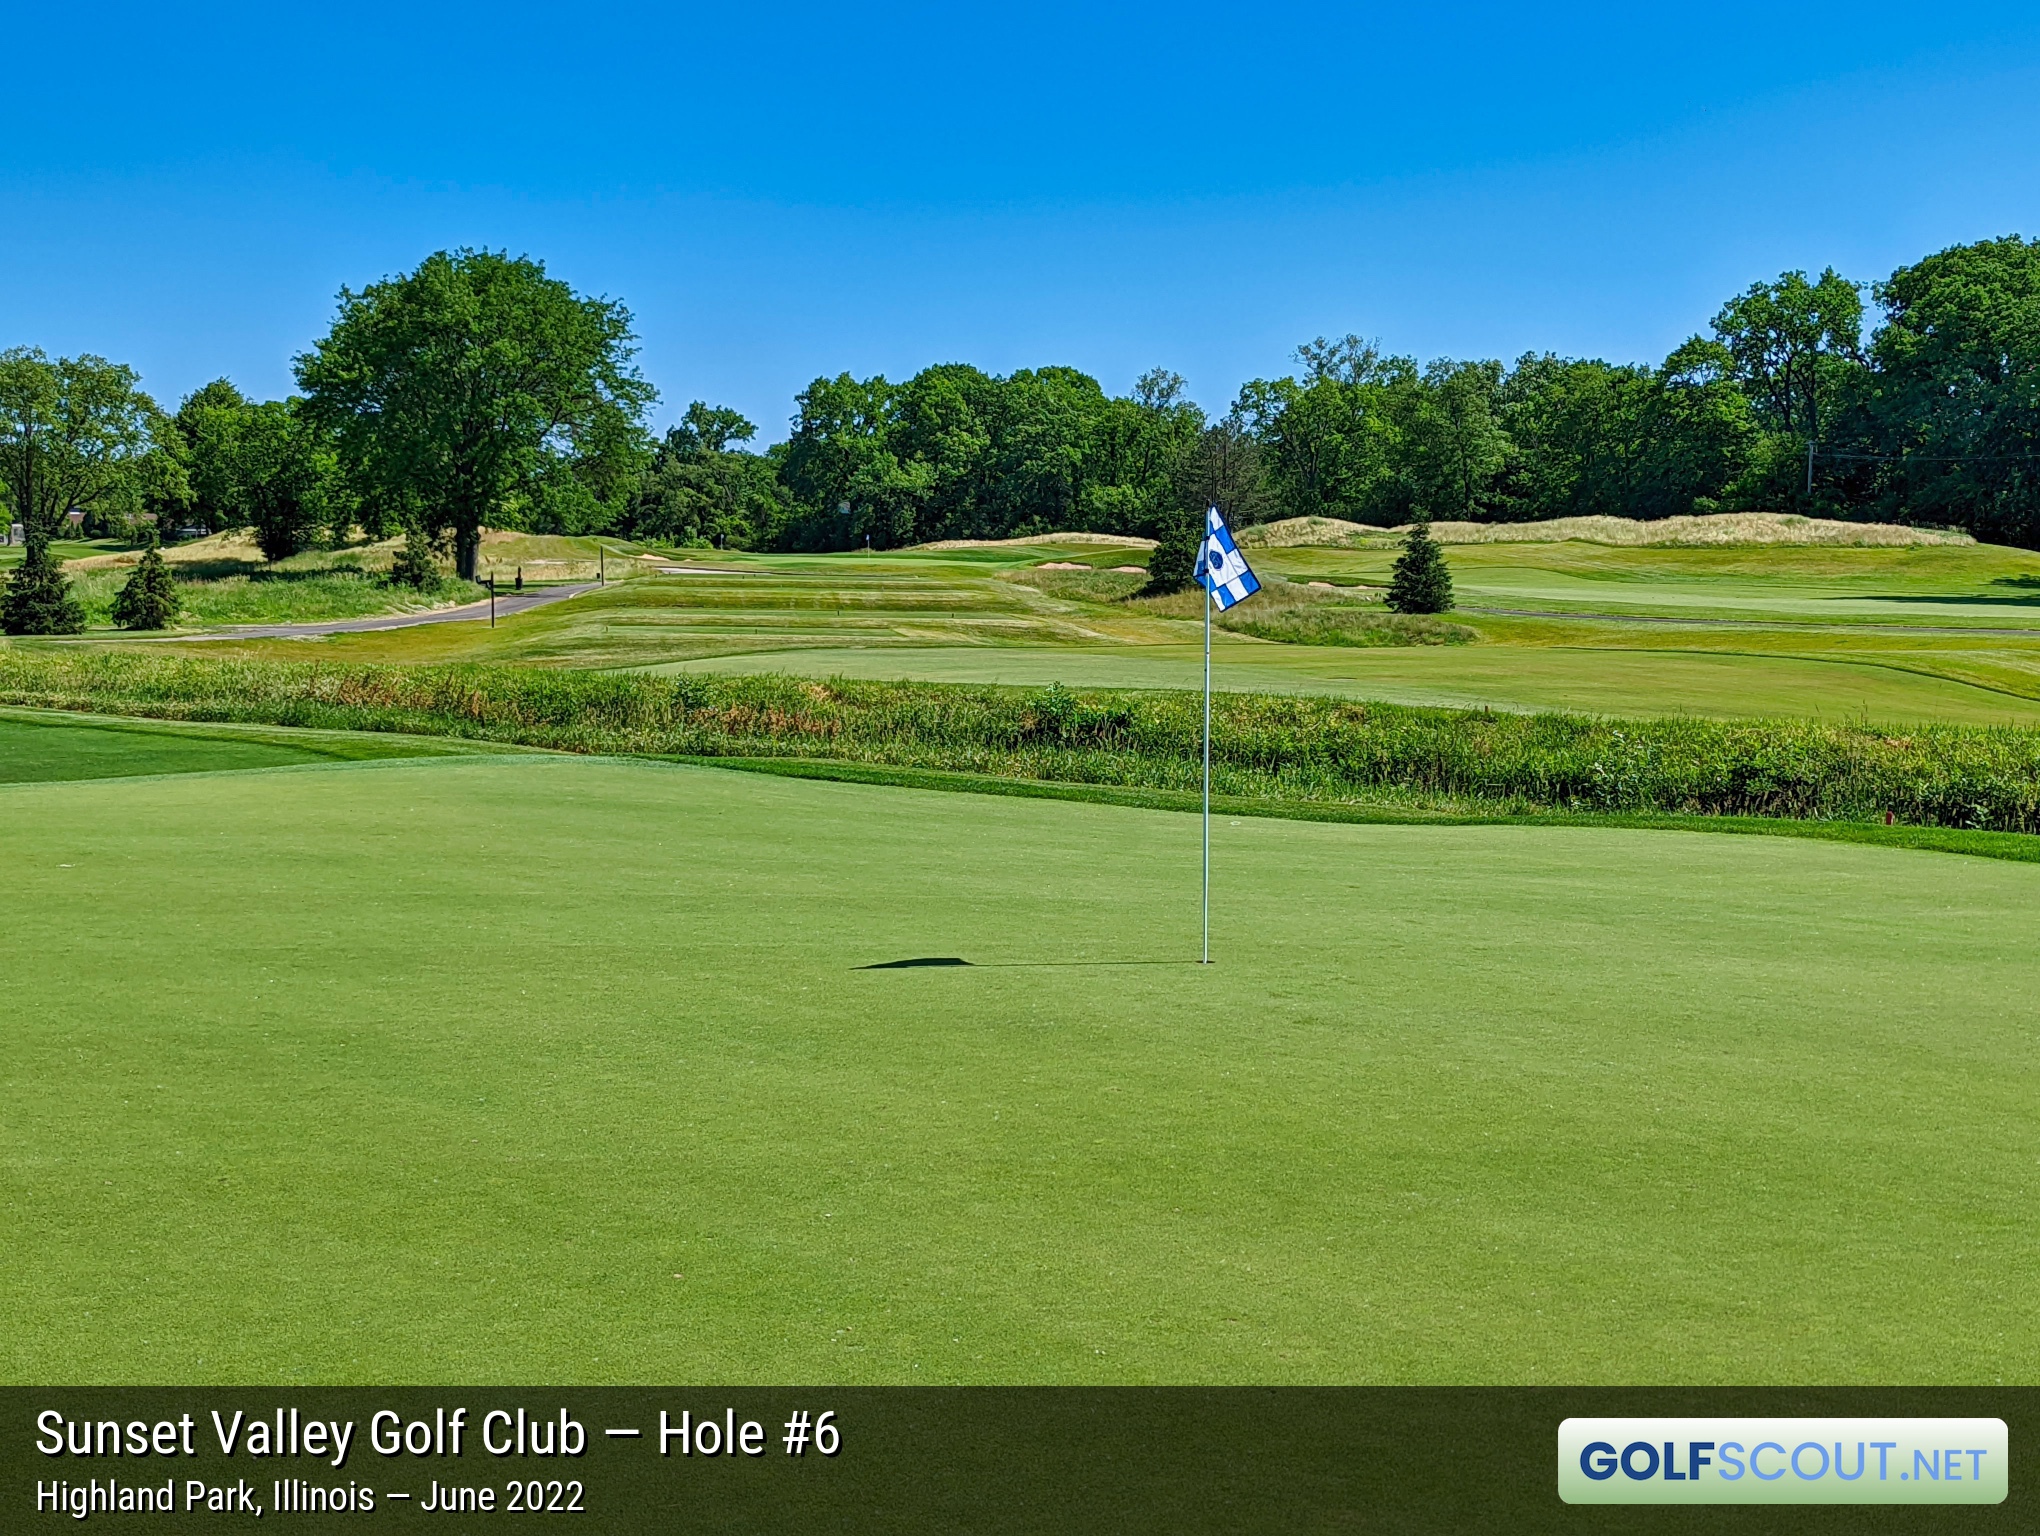 Photo of hole #6 at Sunset Valley Golf Club in Highland Park, Illinois. 